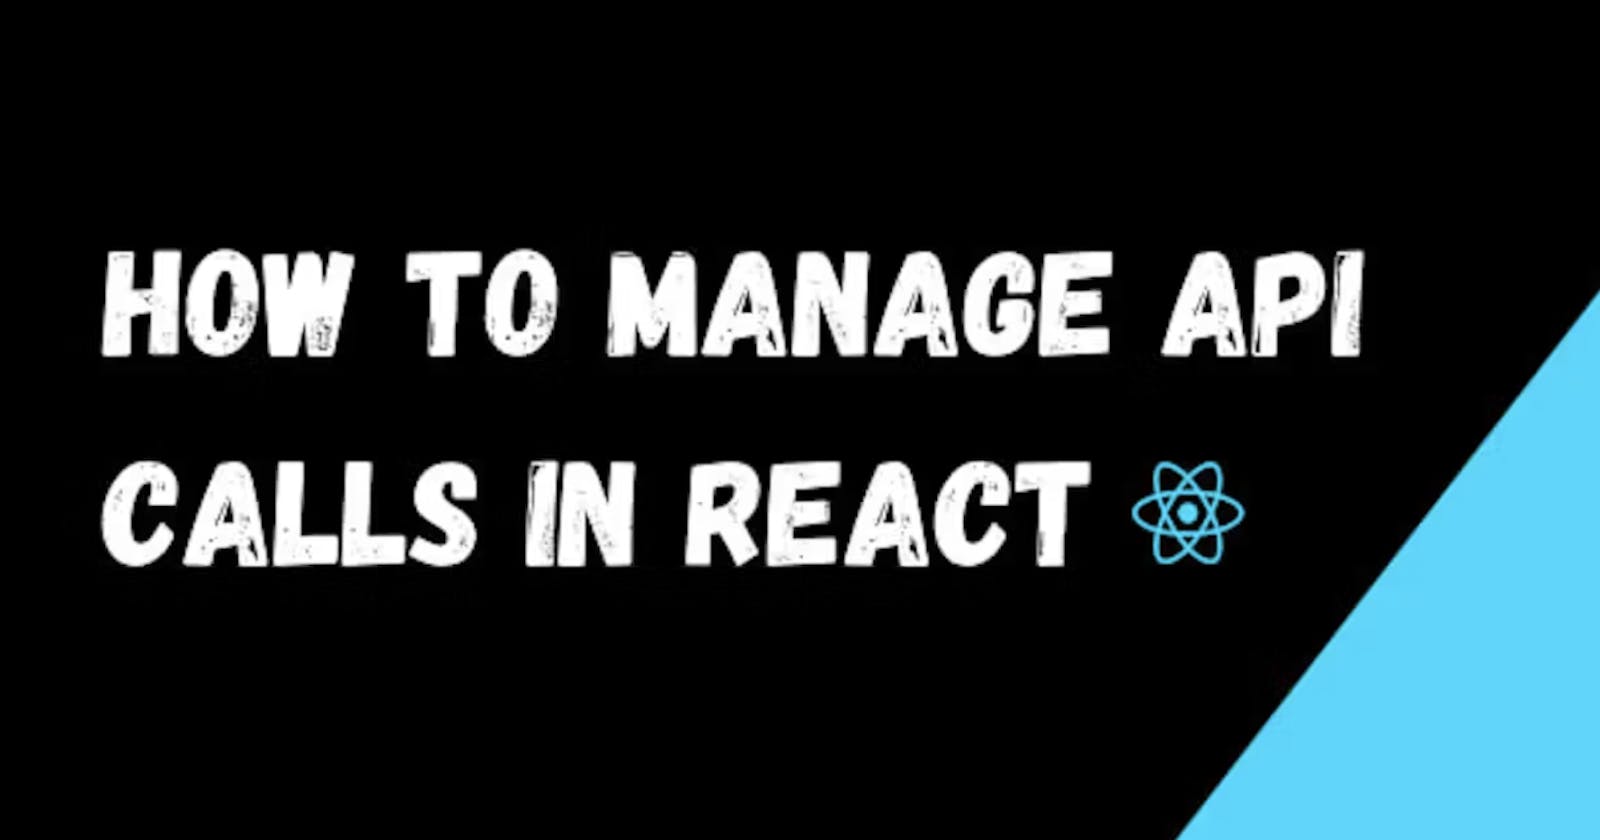 How to manage API calls in React ⚛️